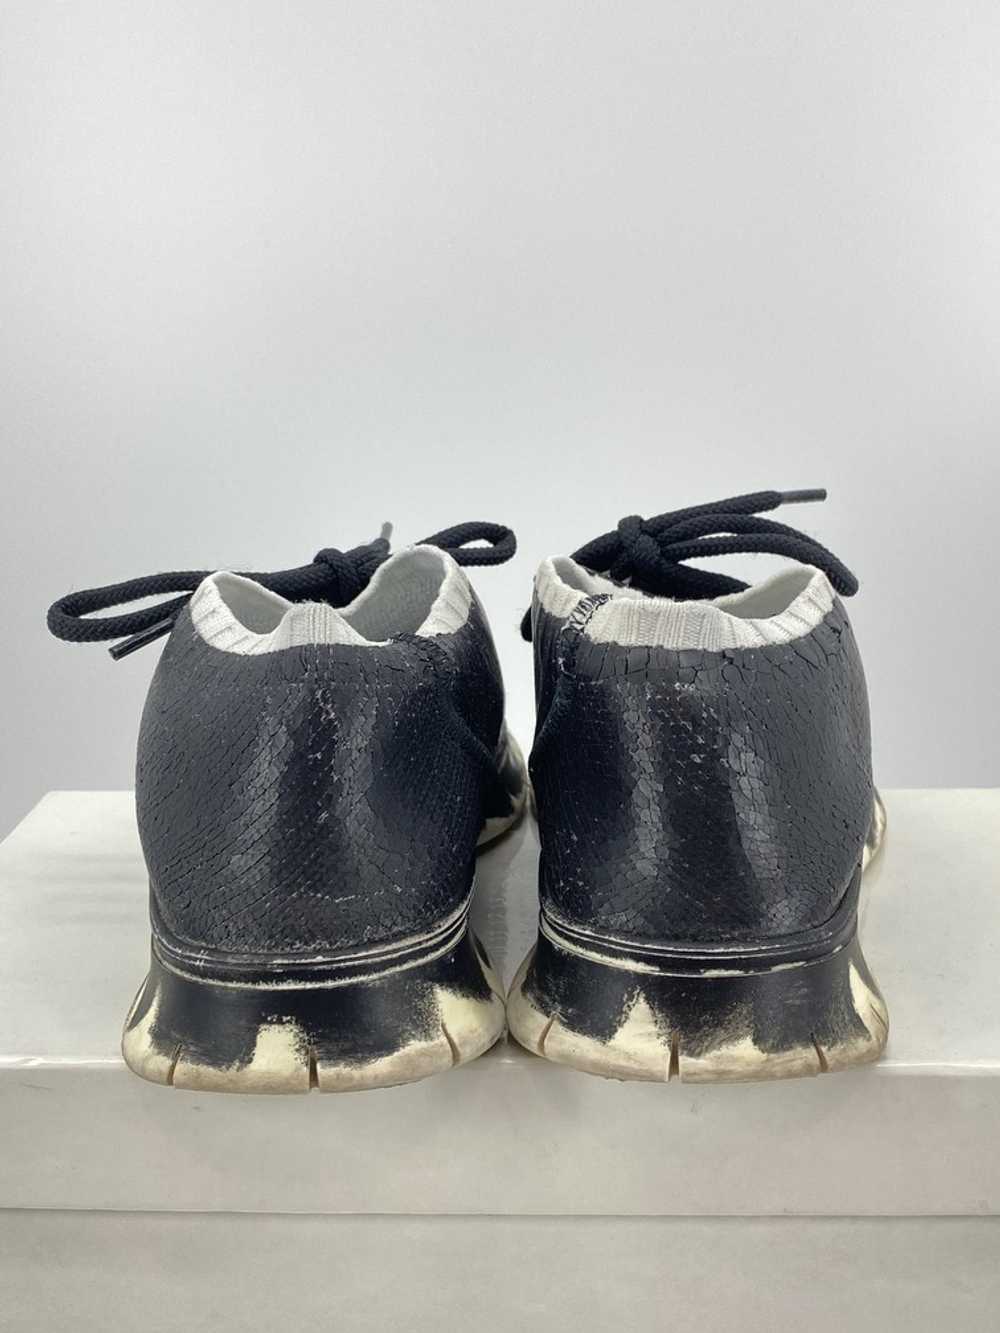 Maison Margiela Hand Painted Flyknit Runners - image 6